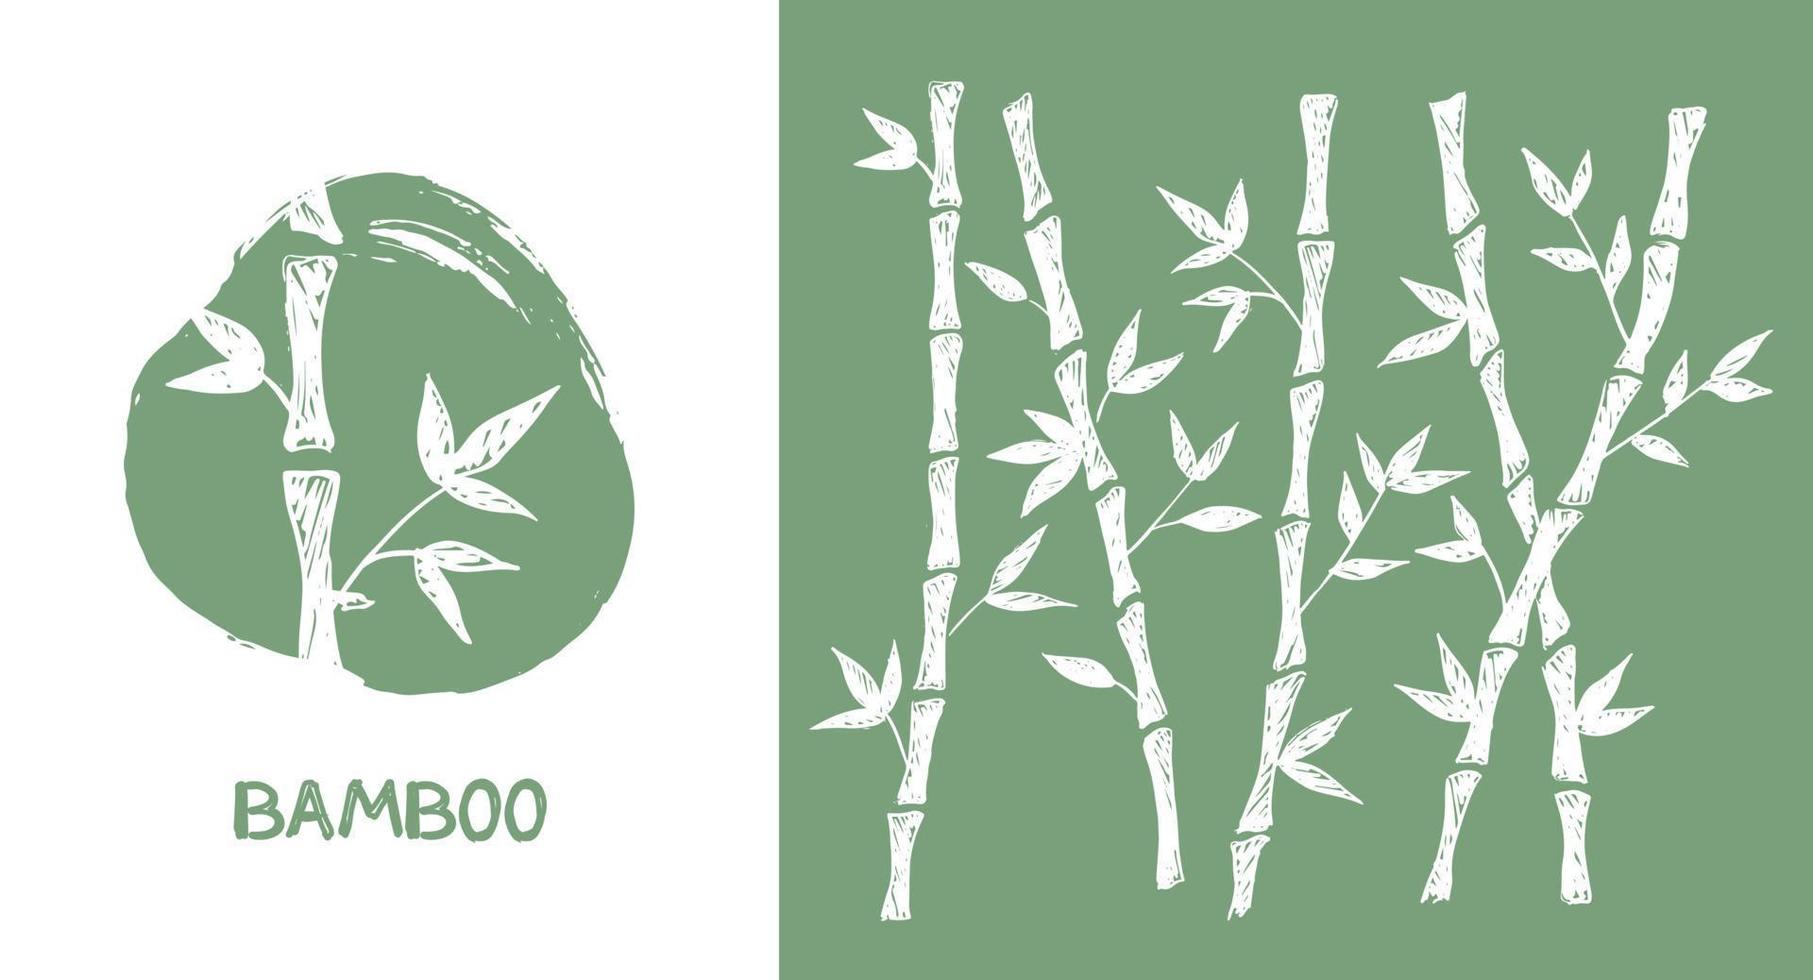 Bamboo tree. Hand drawn style. Vector illustrations.